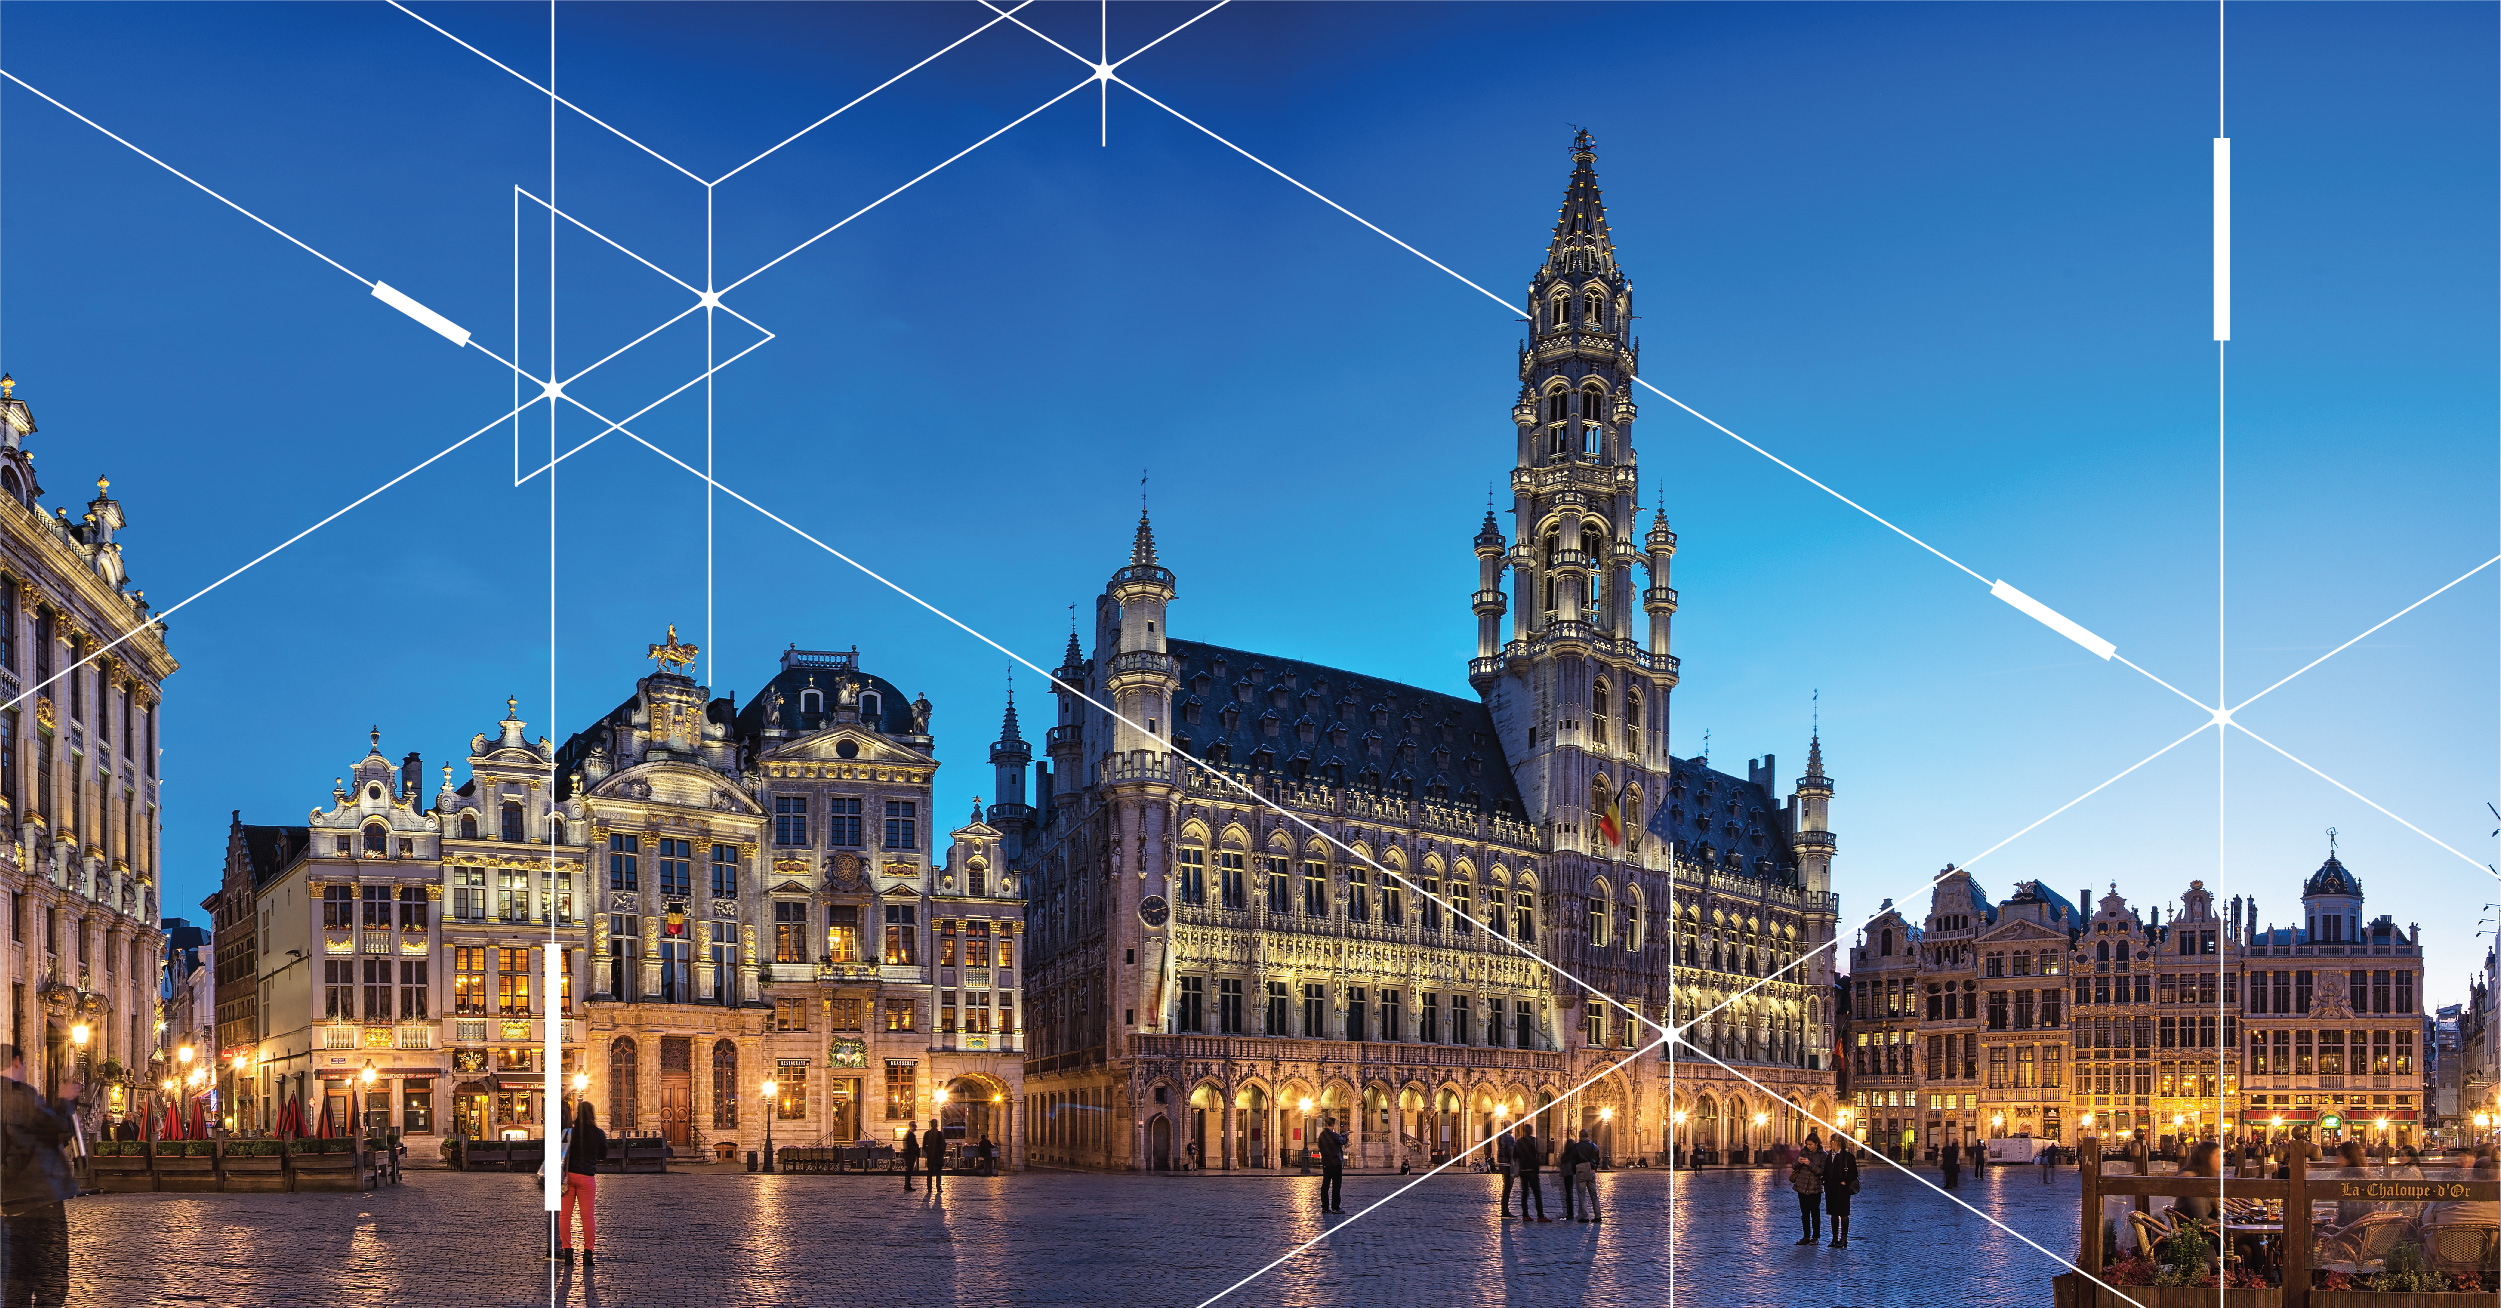 inteliLIGHT, to provide its smart lighting solution for a 10-year public lighting project in Brussels